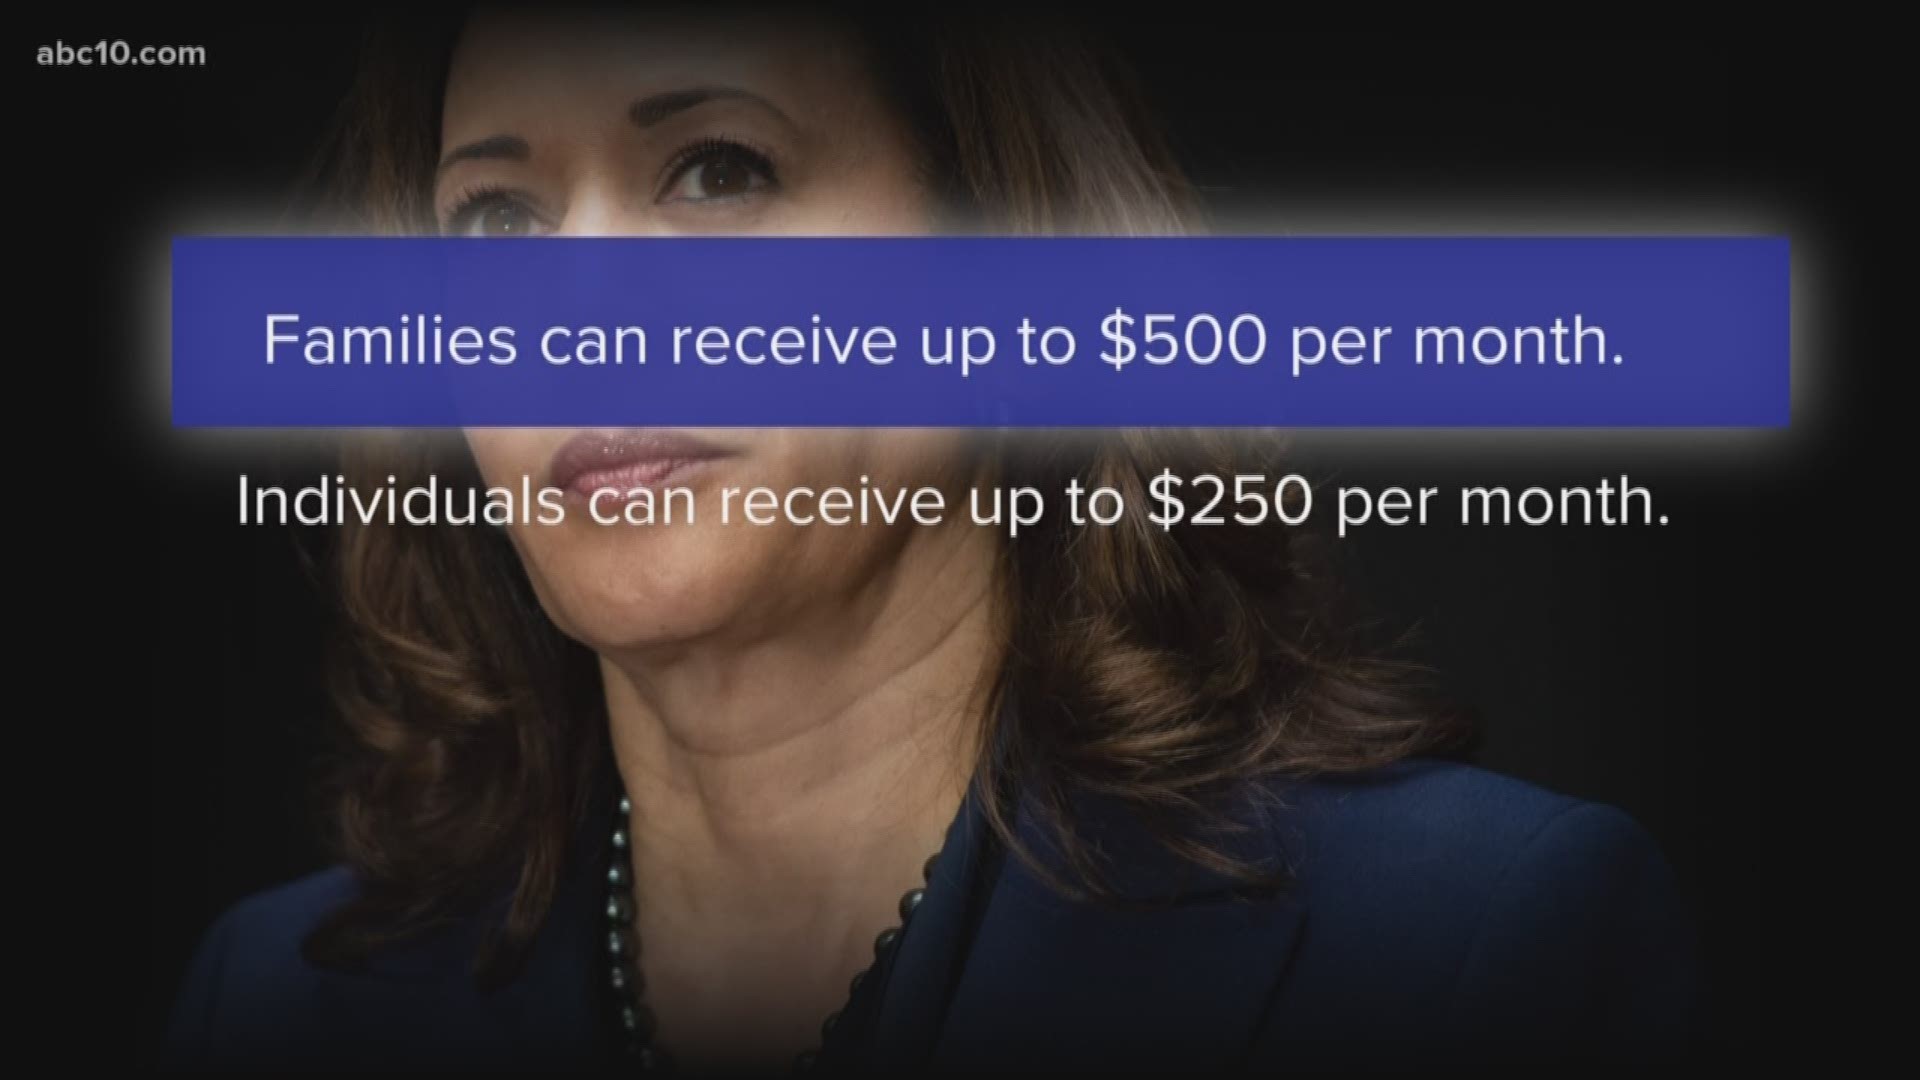 Call it serious, or call it playing politics during election season. Either way, you can call it bold. Ariane Datil has more on people's reaction to Sen. Kamala Harris' tax plan proposal.